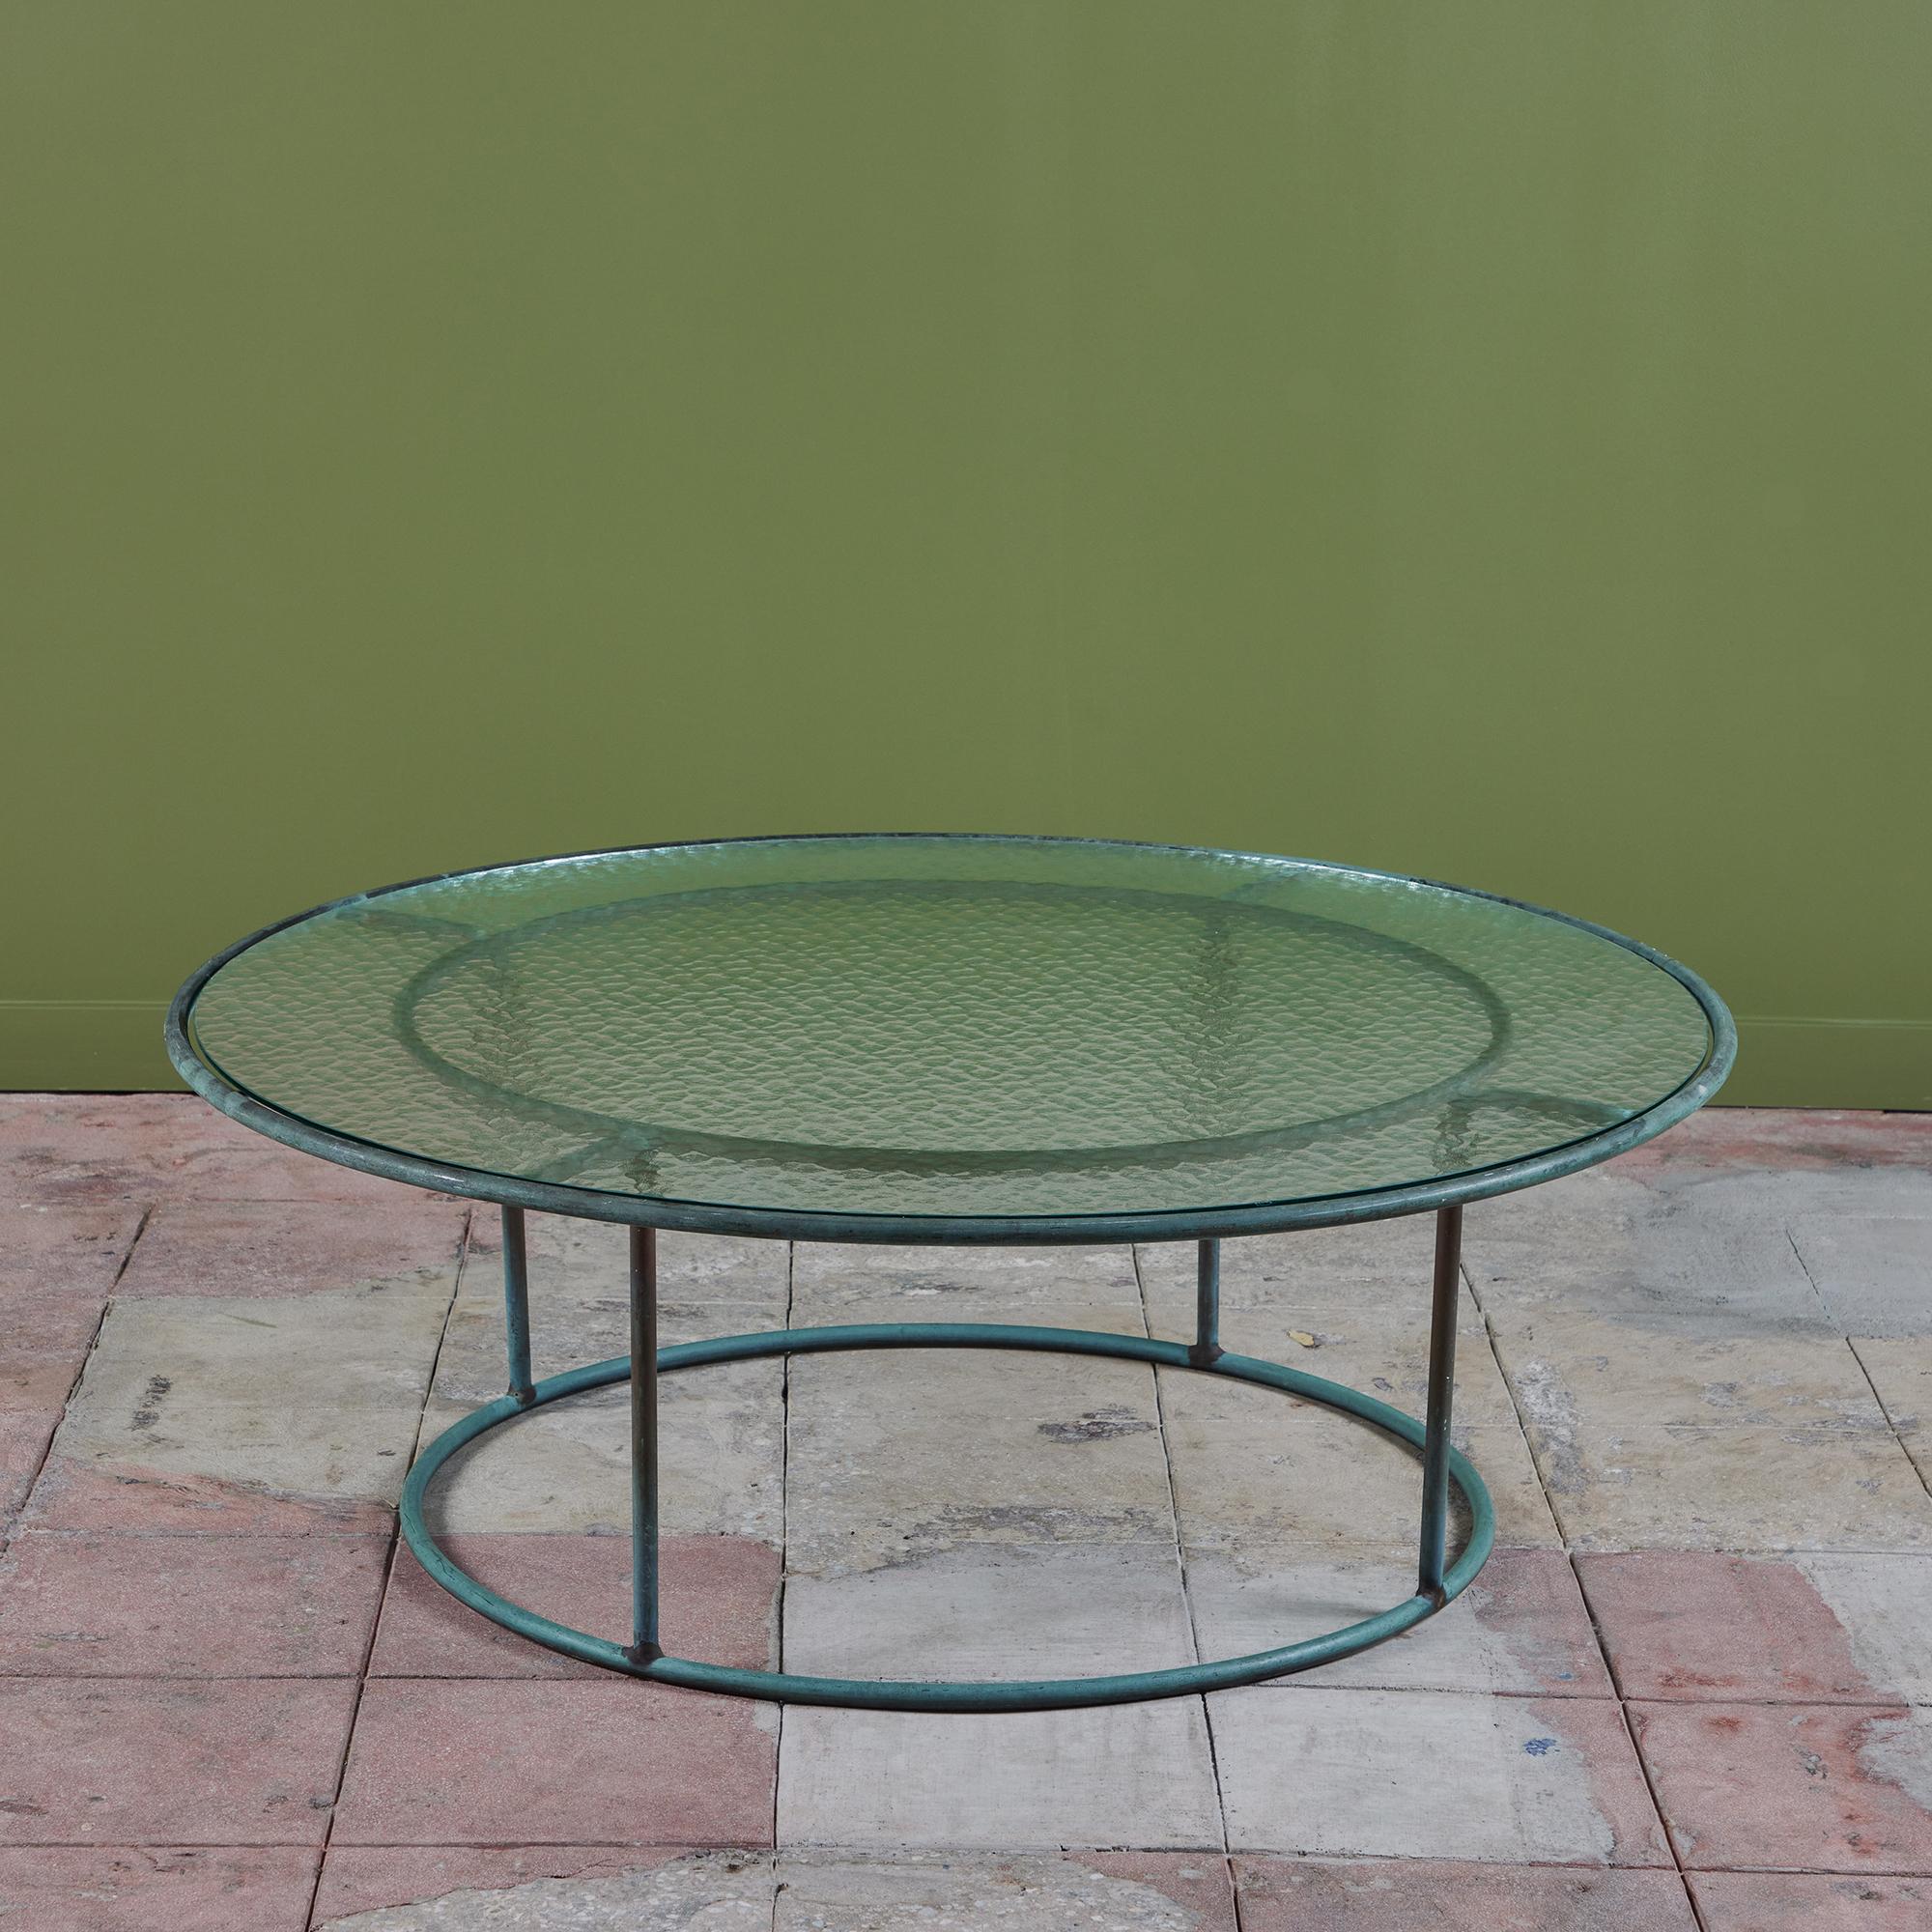 Patio coffee table in patinated bronze designed by Walter Lamb and produced by Brown Jordan. The frame is described by two concentric rings of bronze with radial supports and a circular bronze base. The round tabletop is a single piece of hammered